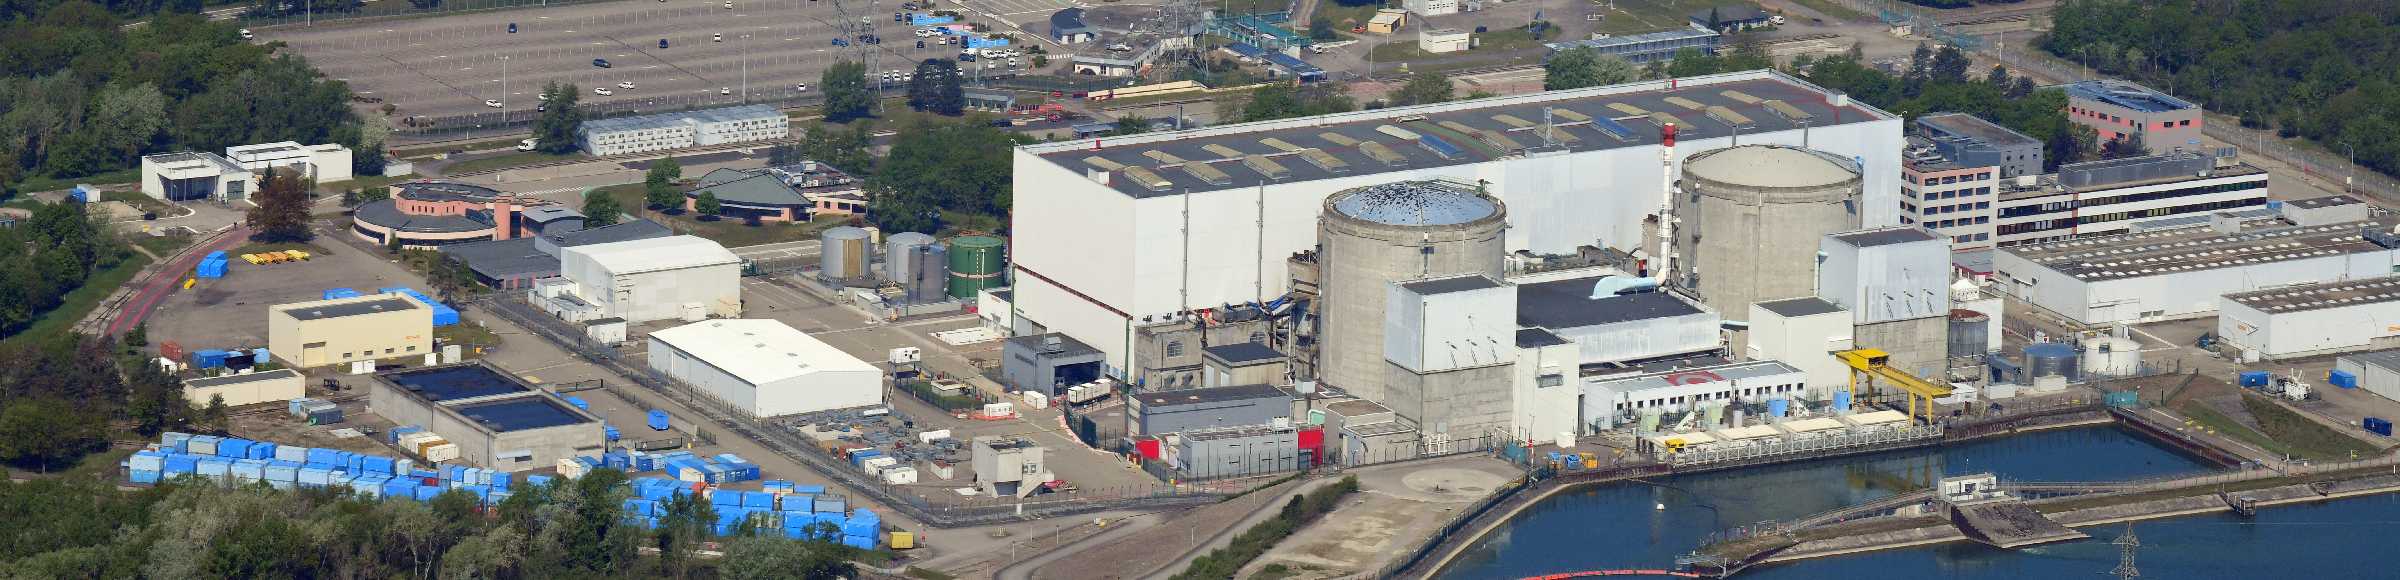 The nuclear power plant in Fessenheim in France on the Upper Rhine on the shore of the Grand Canal d'Alsace is the oldest nuclear power plant in France